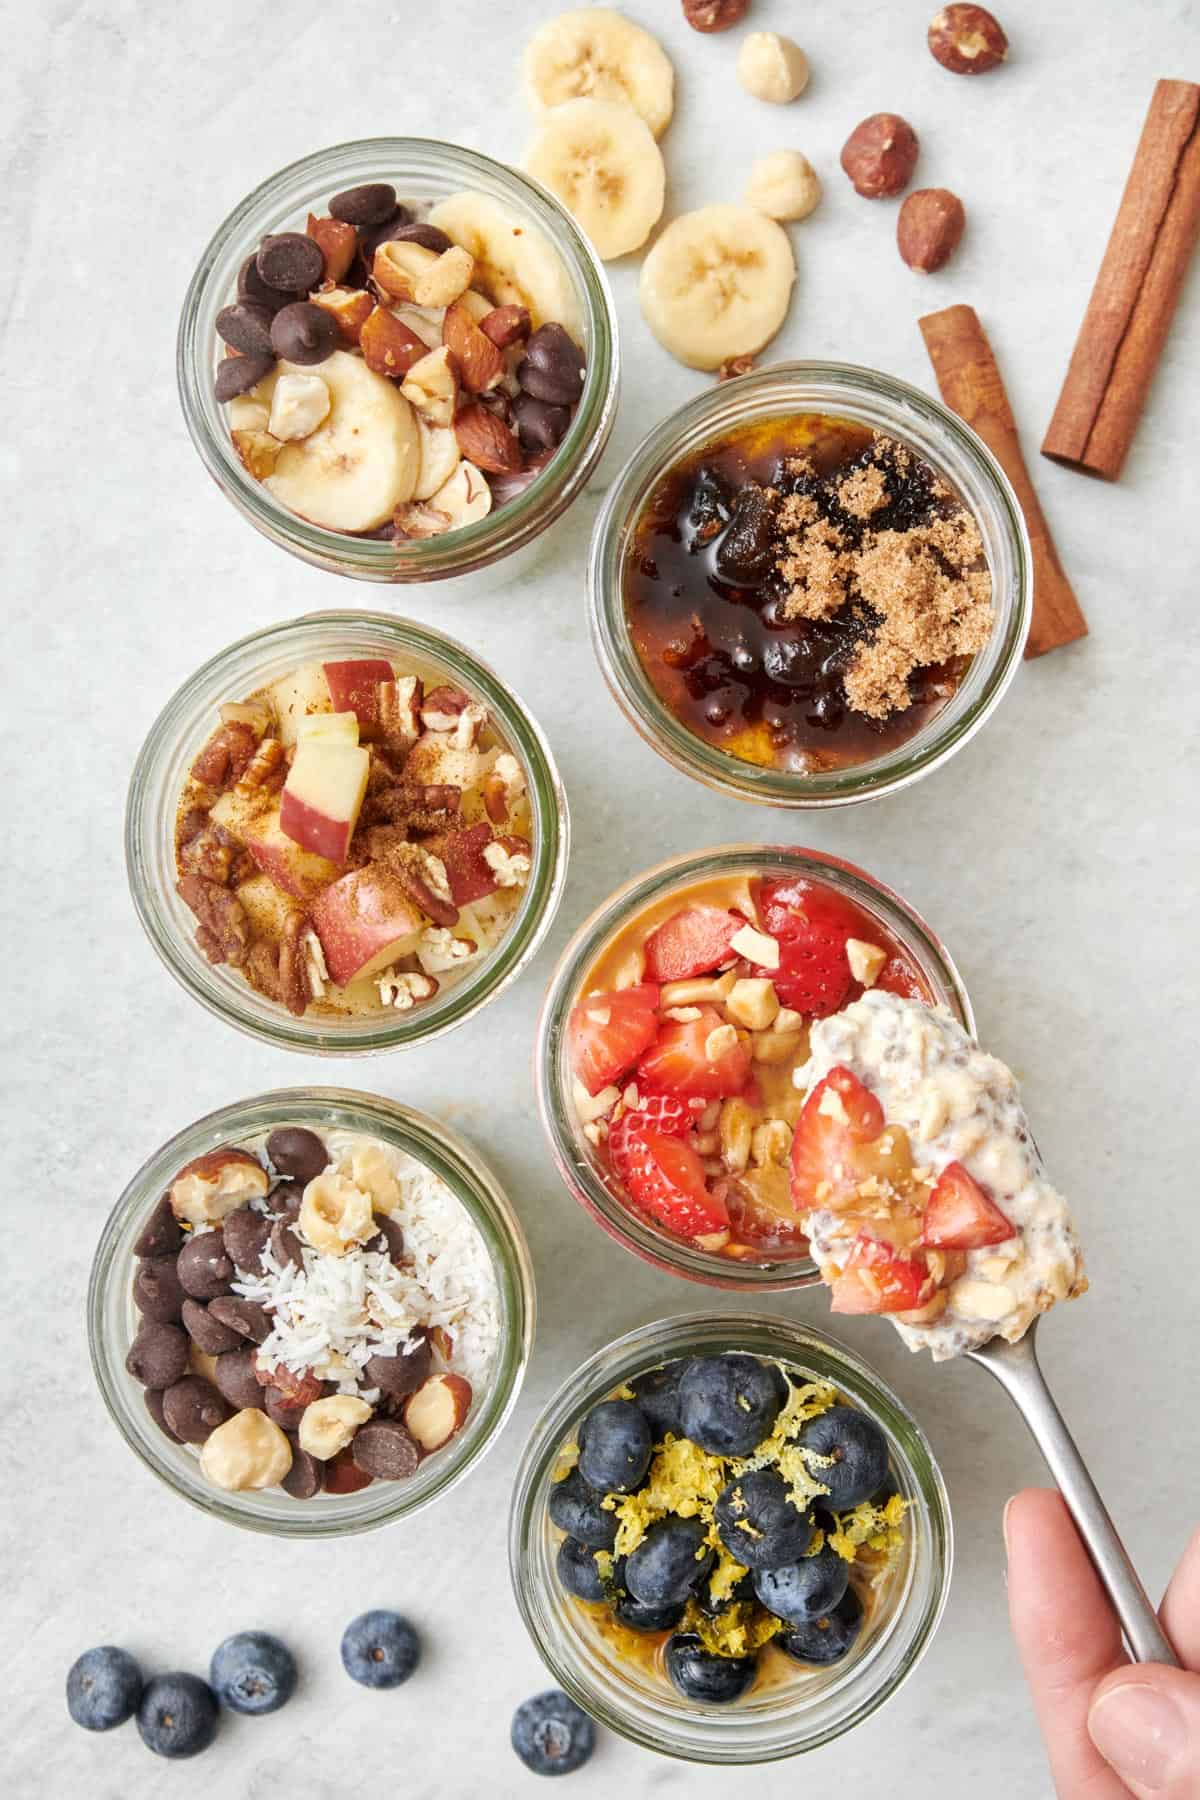 Overhead shot of 6 different overnight oat recipes with a spoon lifting up a bite from one.